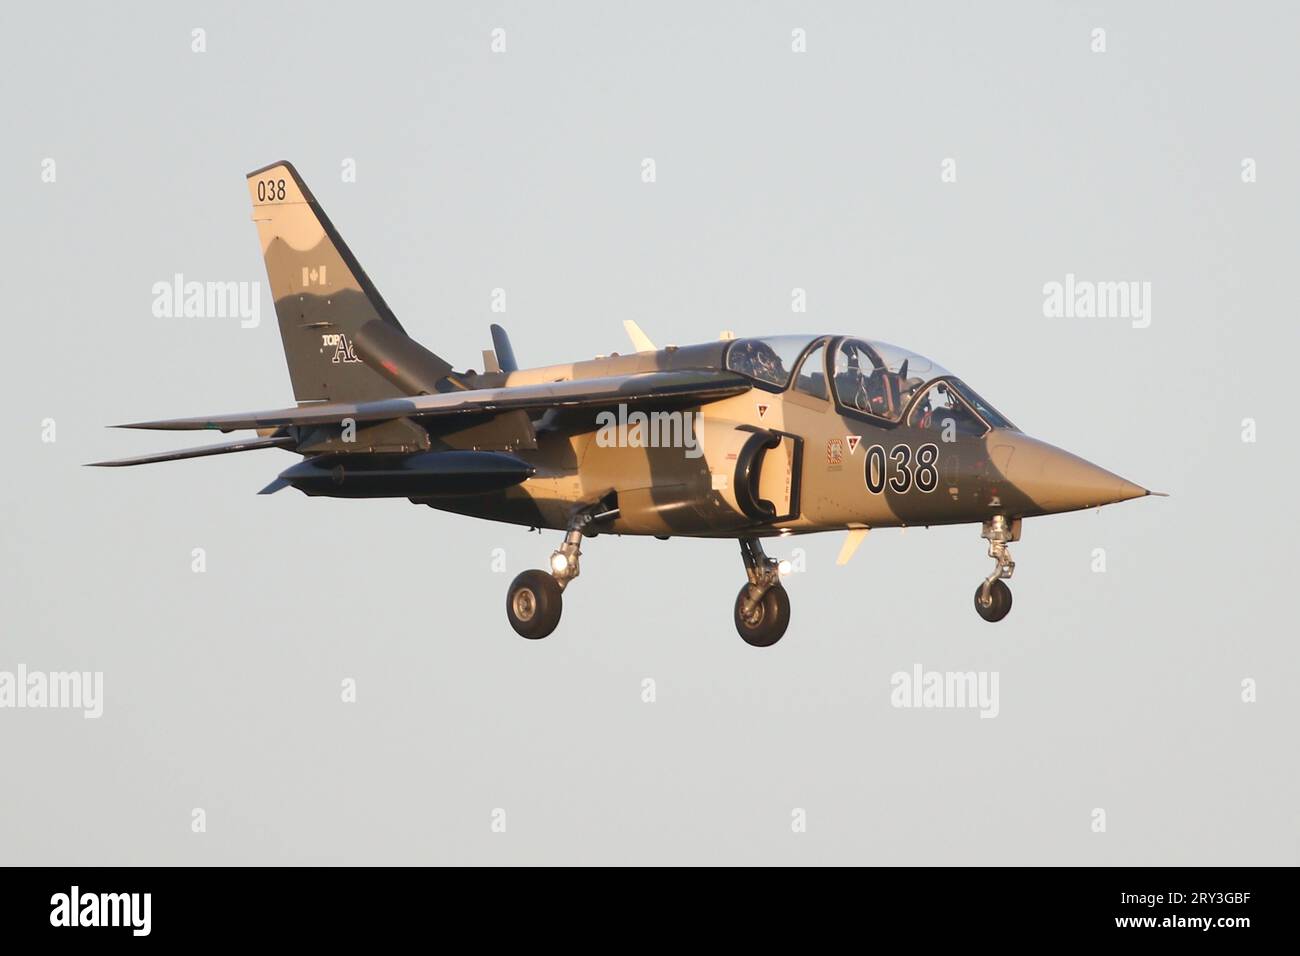 Civilian Alpha Jet from Canadian company, Top Aces landing at RAF Lakenheath after completing a training sortie with USAF F-15s. Stock Photo